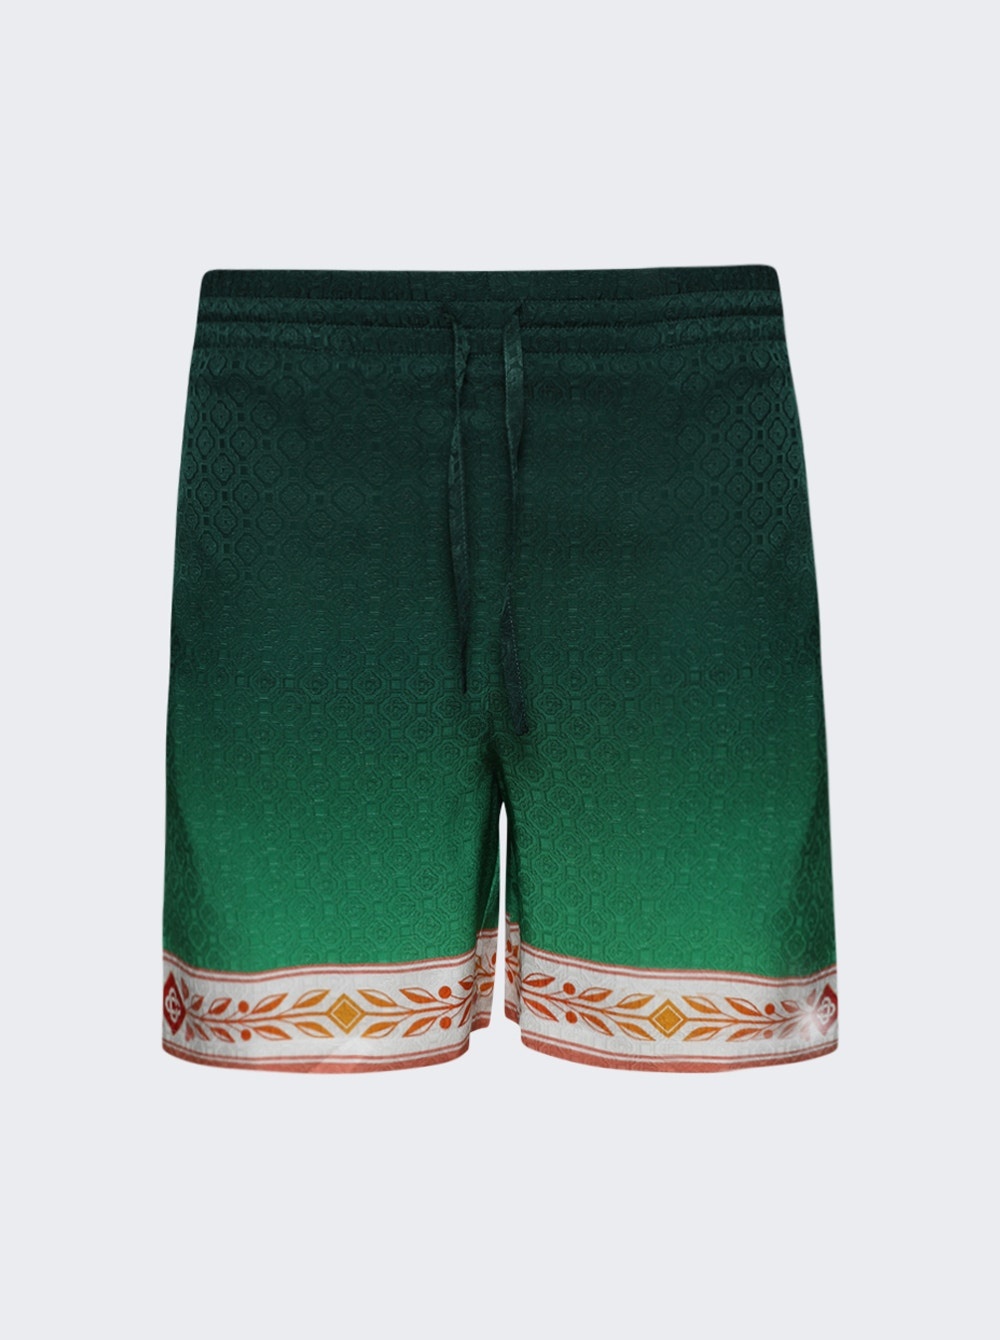 Unity Is Power Shorts Green - 1